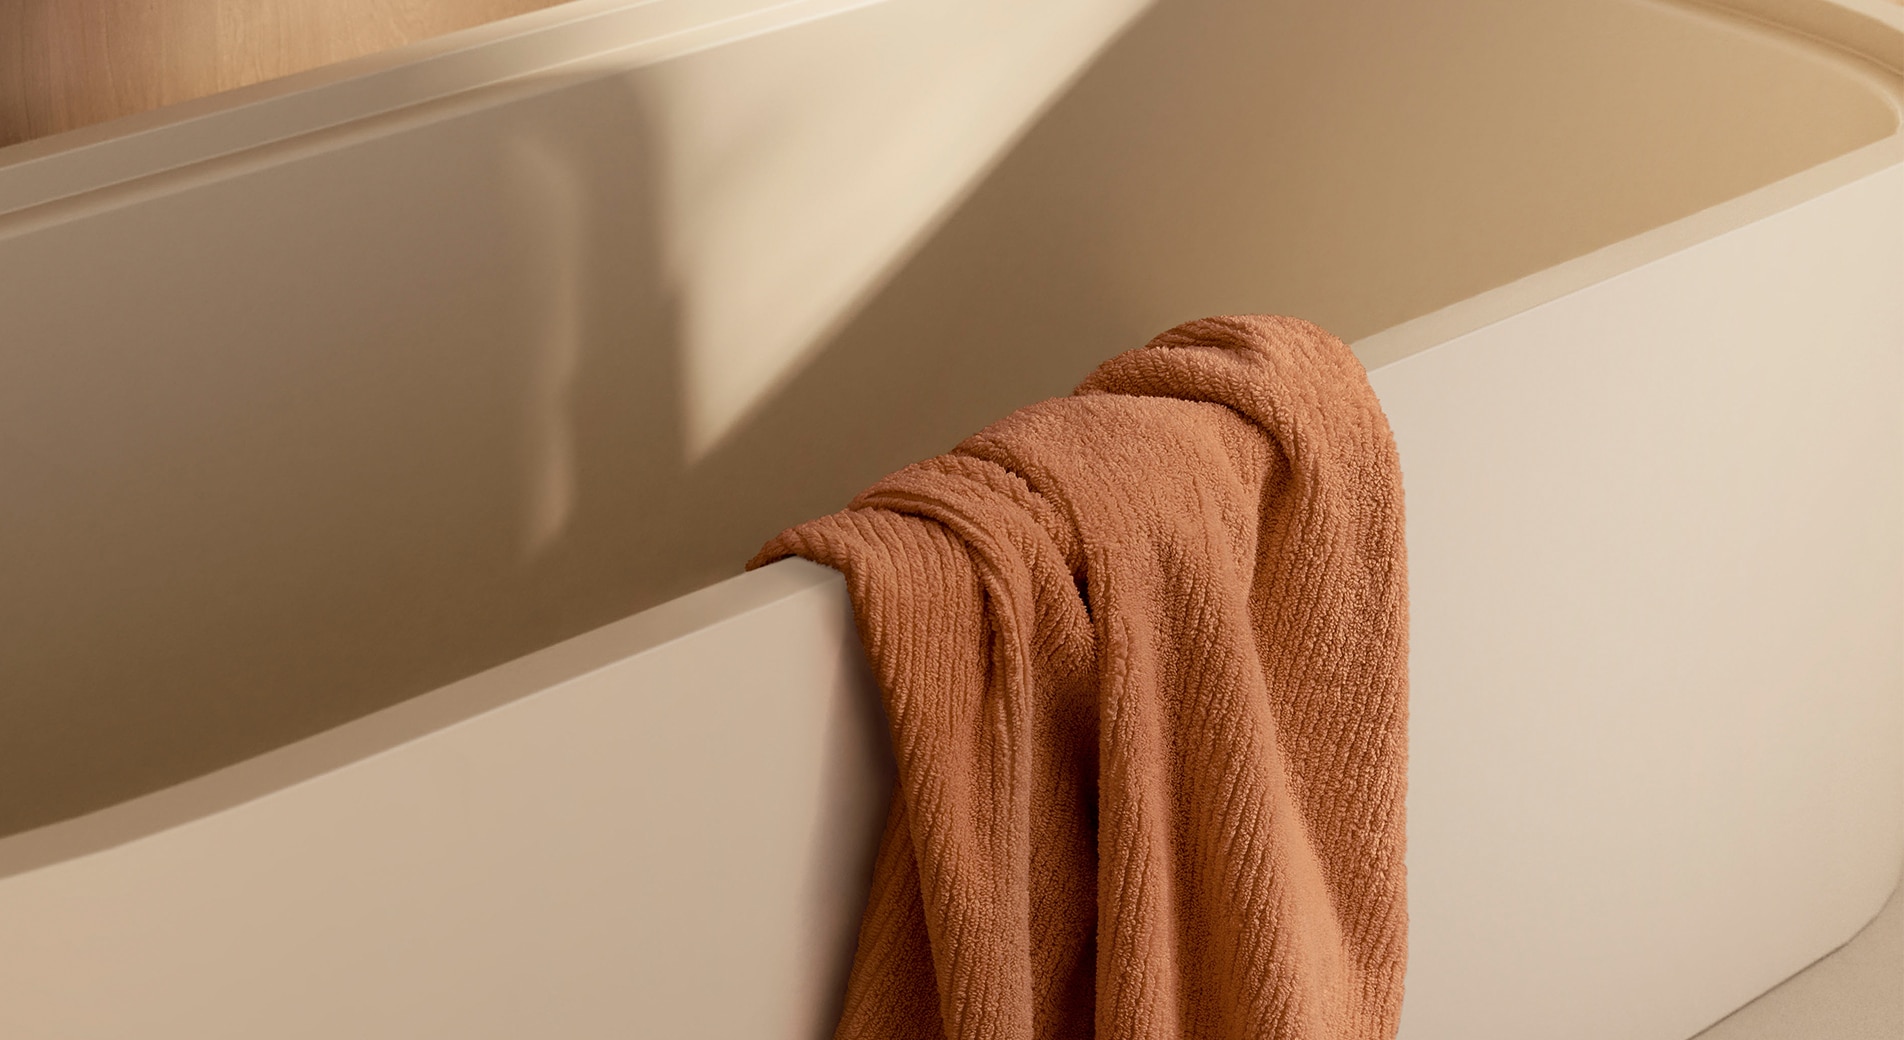 orange towel is styled over the side of a cream bath tub.